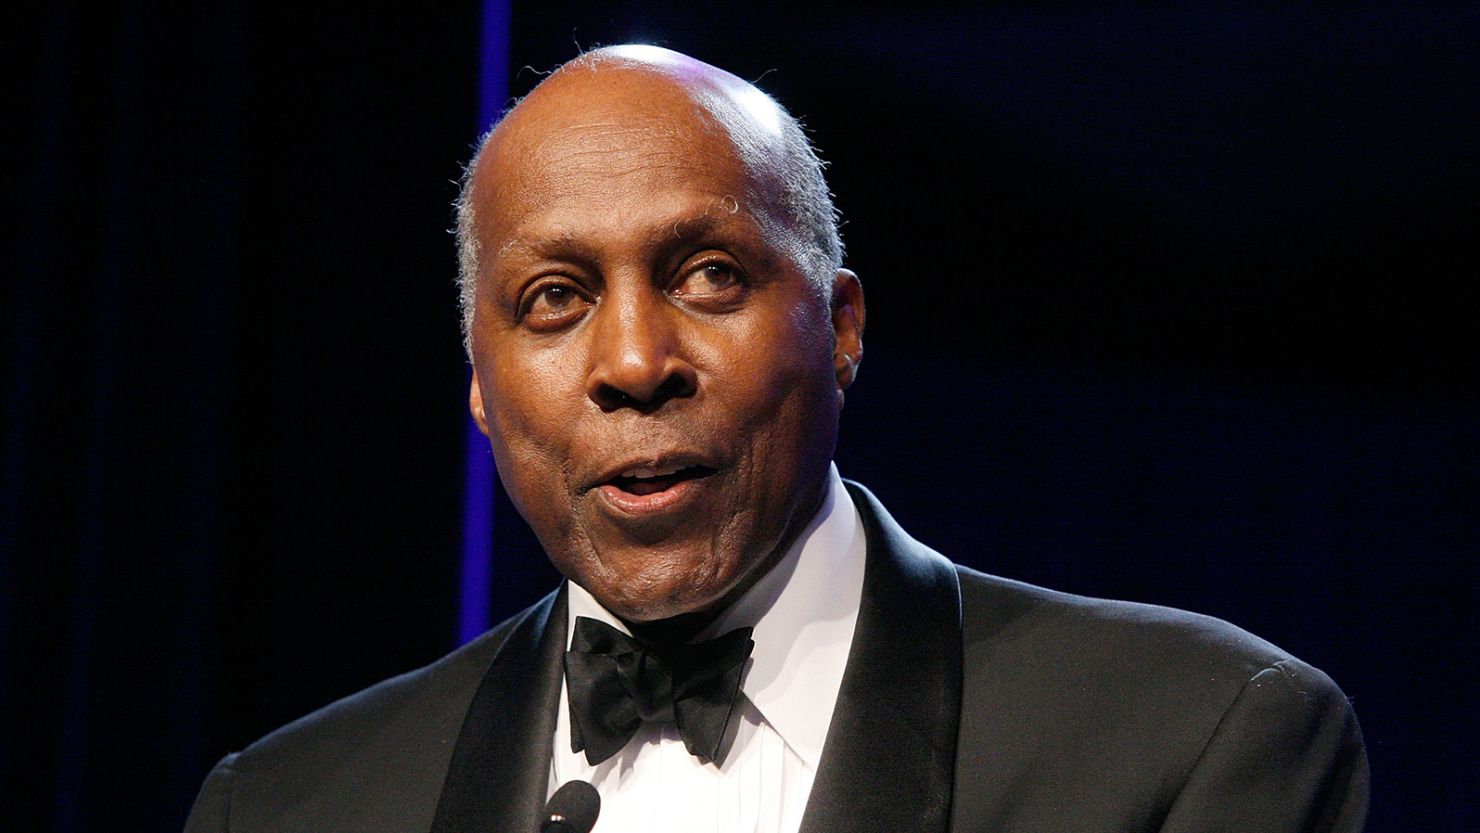 Vernon Jordan attends the 40th Anniversary Gala for "A Mind Is A Terrible Thing To Waste" Campaign on March 3, 2011 in New York City.  